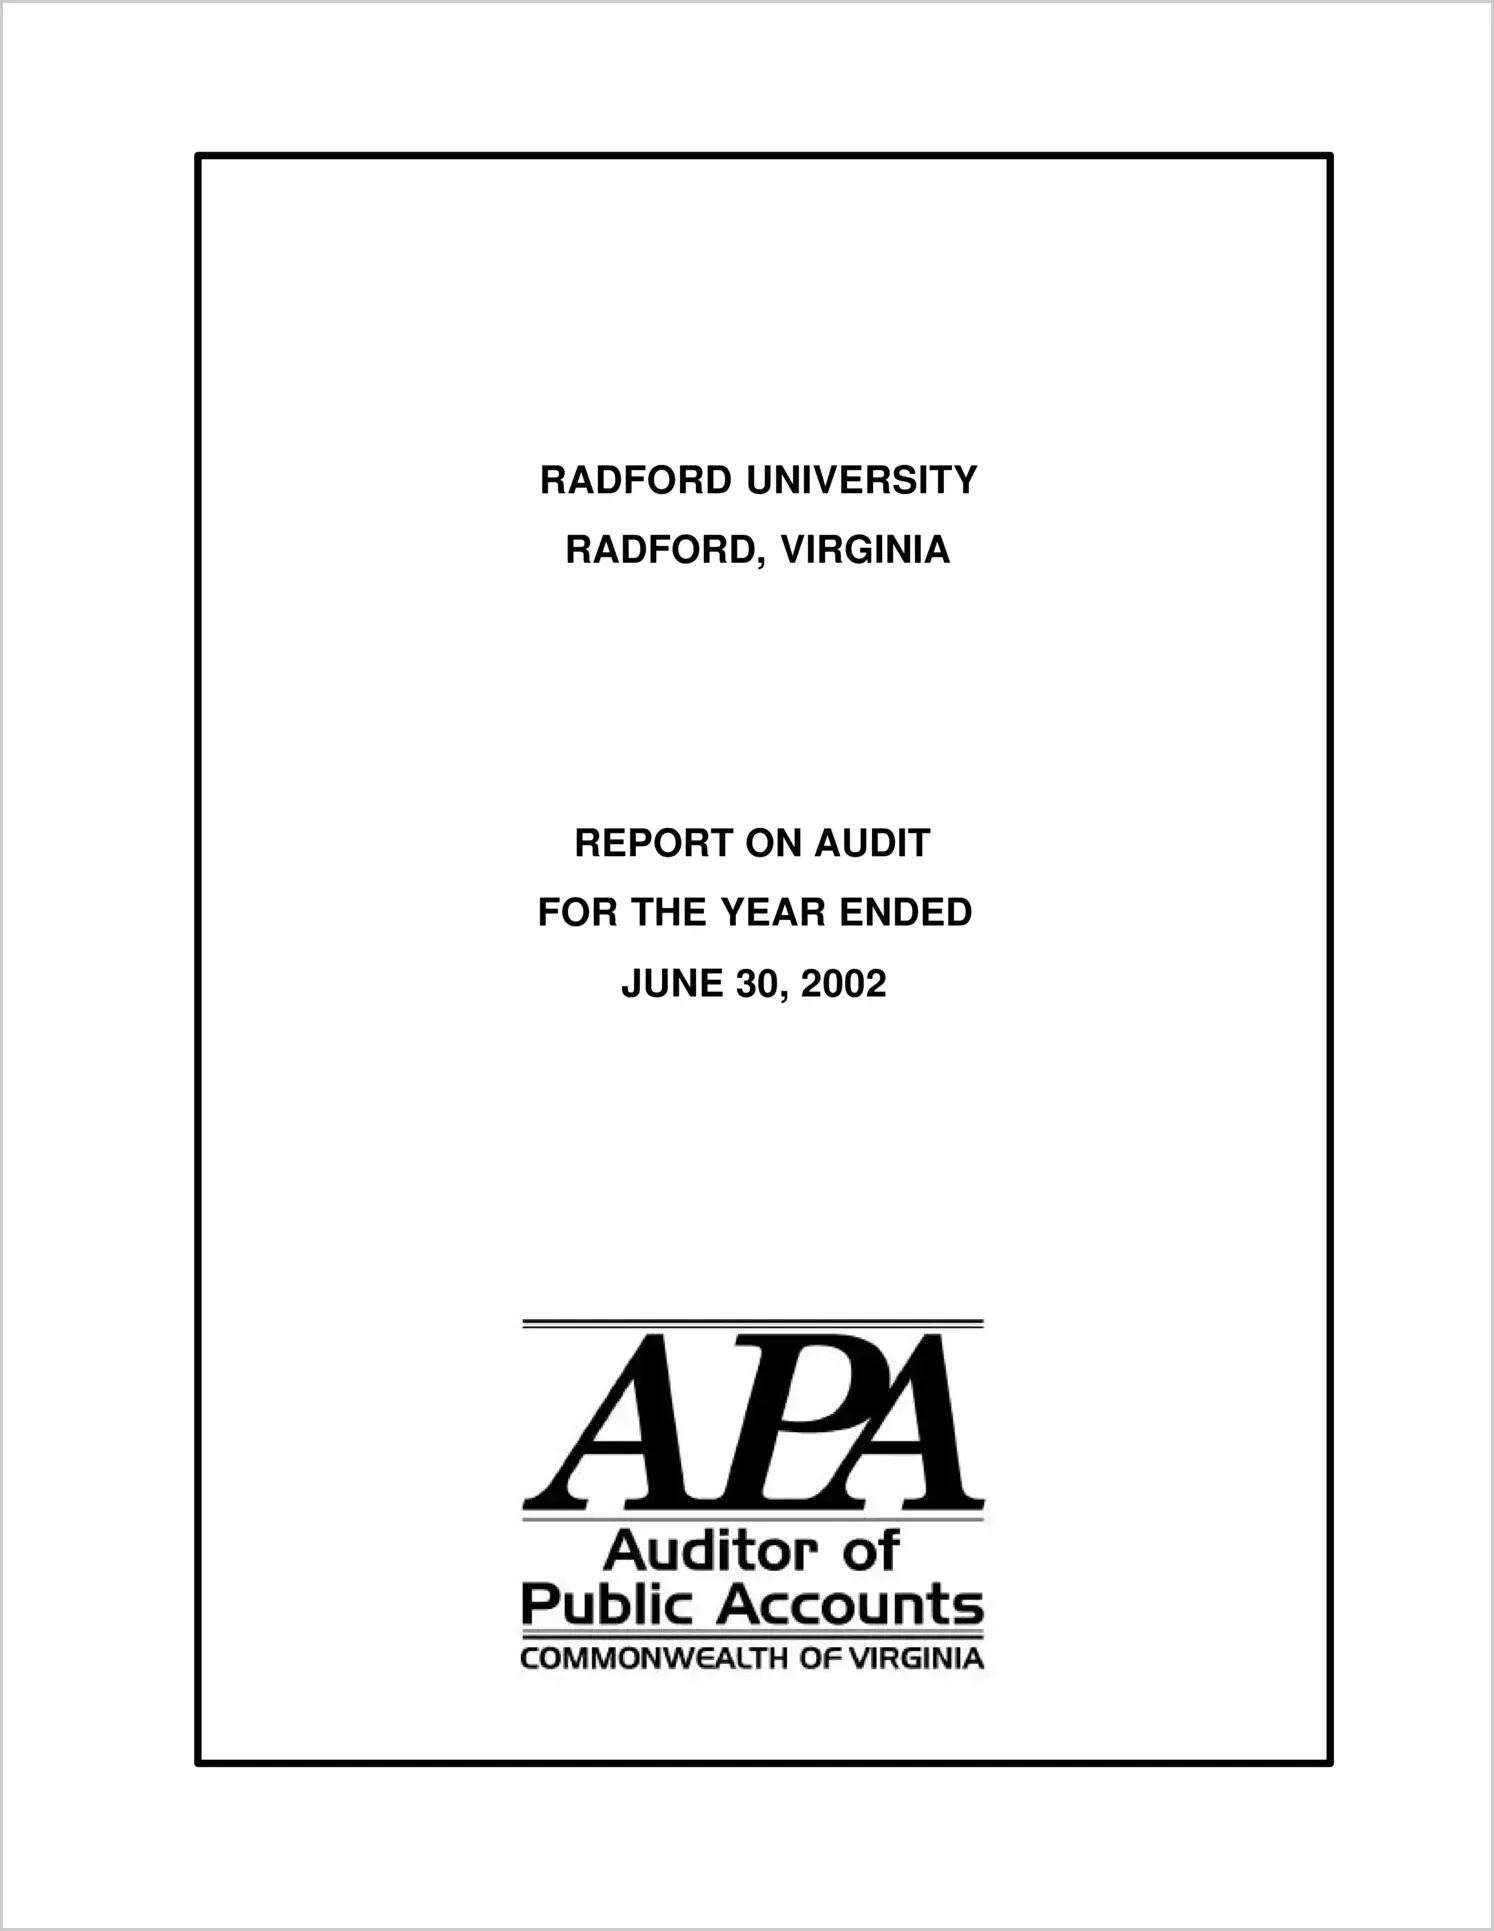 Radford University for the year ended June 30, 2002